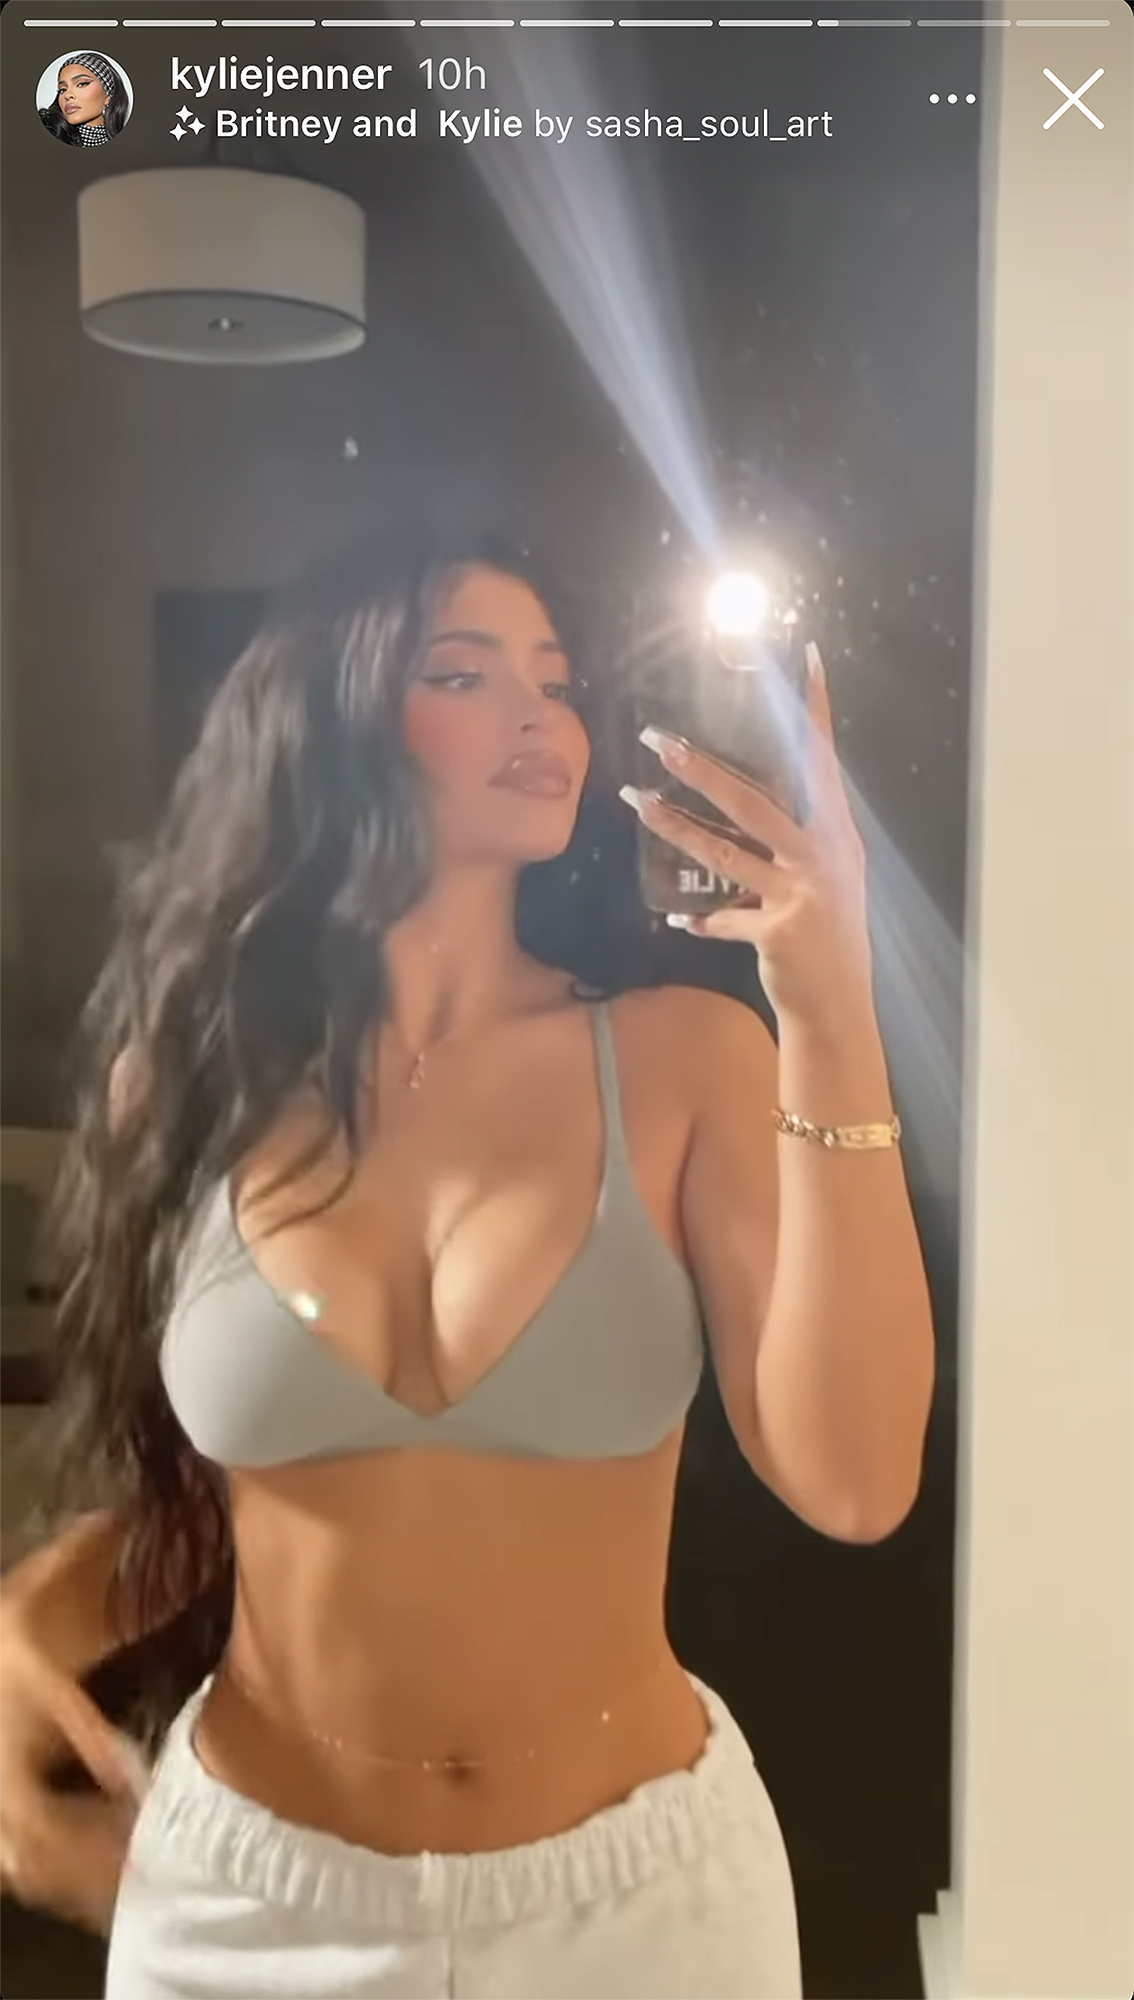 Kylie Jenner Shows Off Her Curves in High-Waisted Underwear